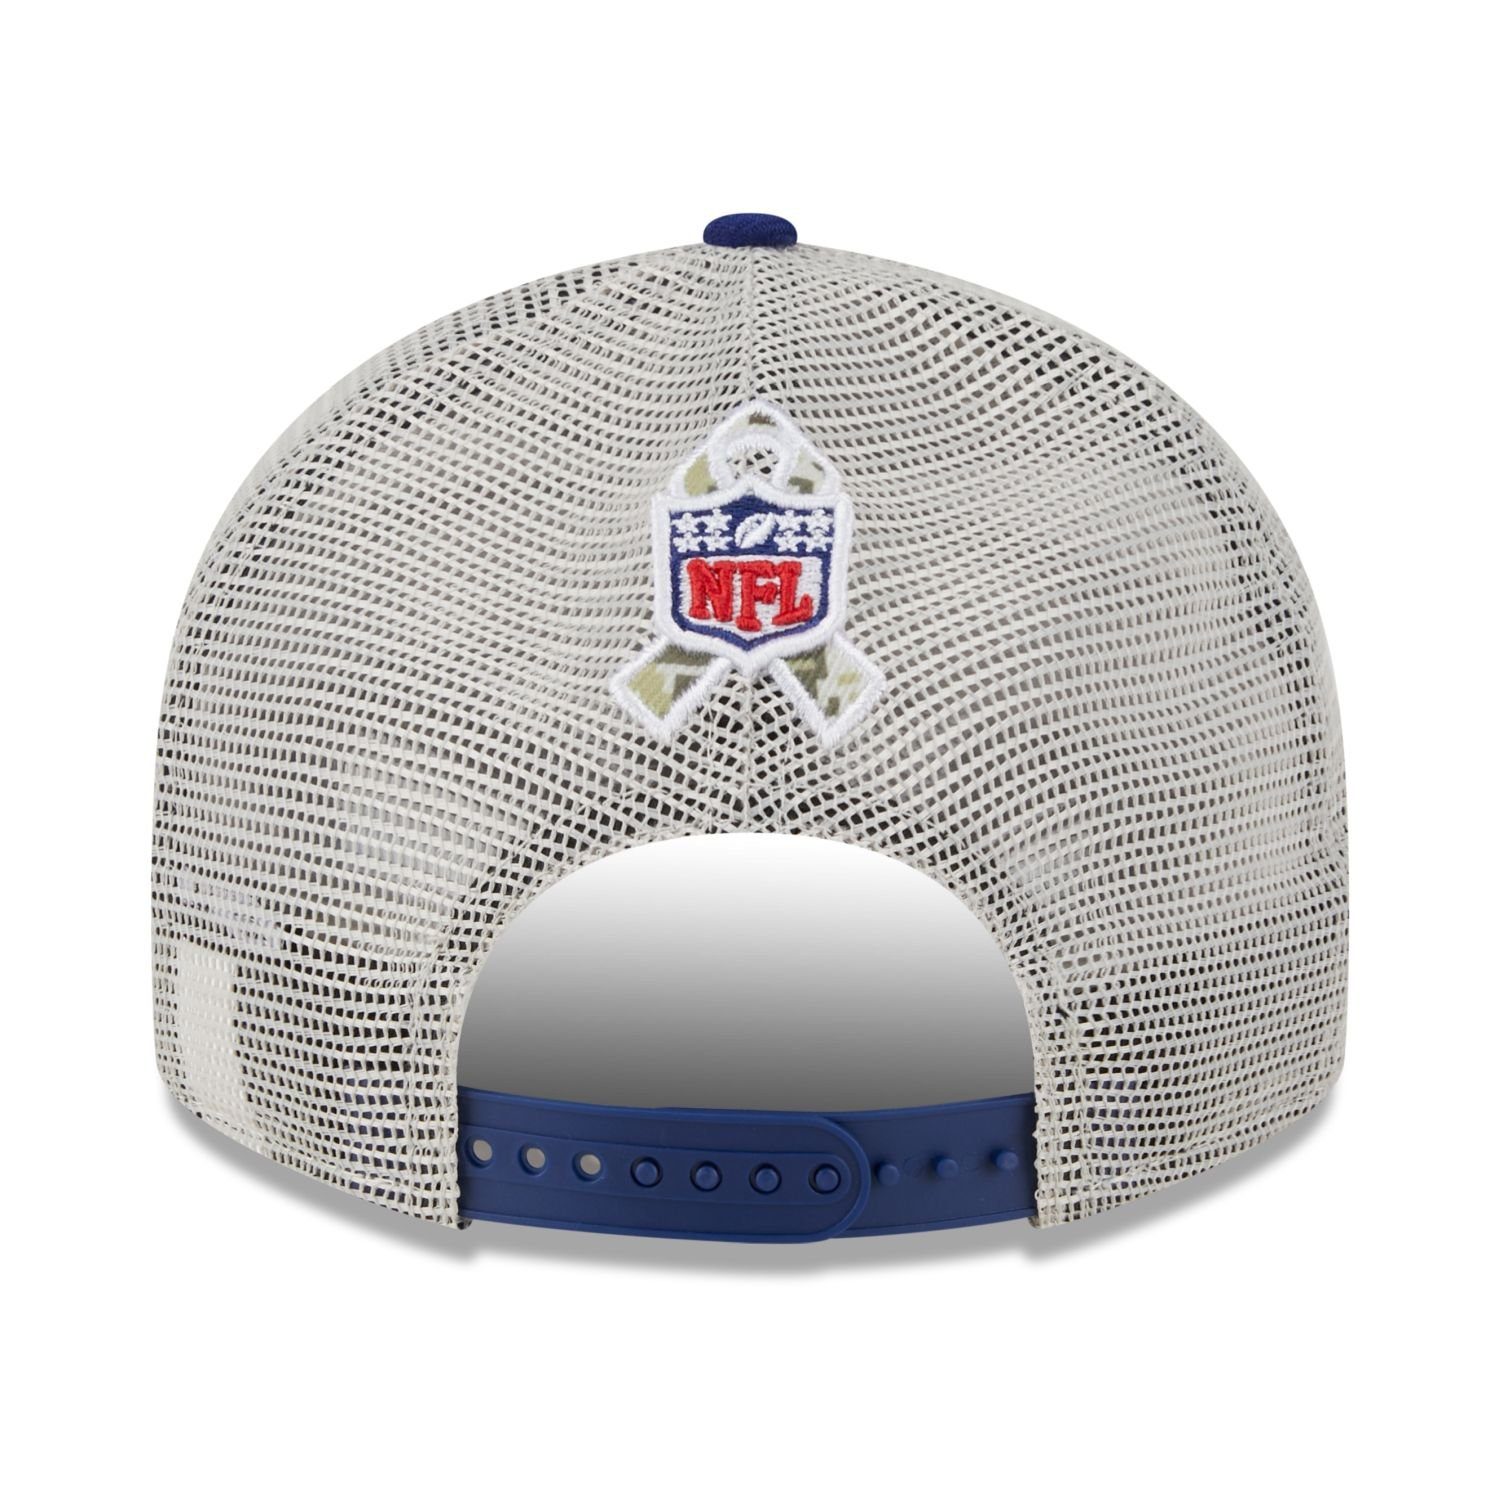 New SHIELD Era NFL to Cap Profile Snap Salute Low 9Fifty NFL Snapback Service